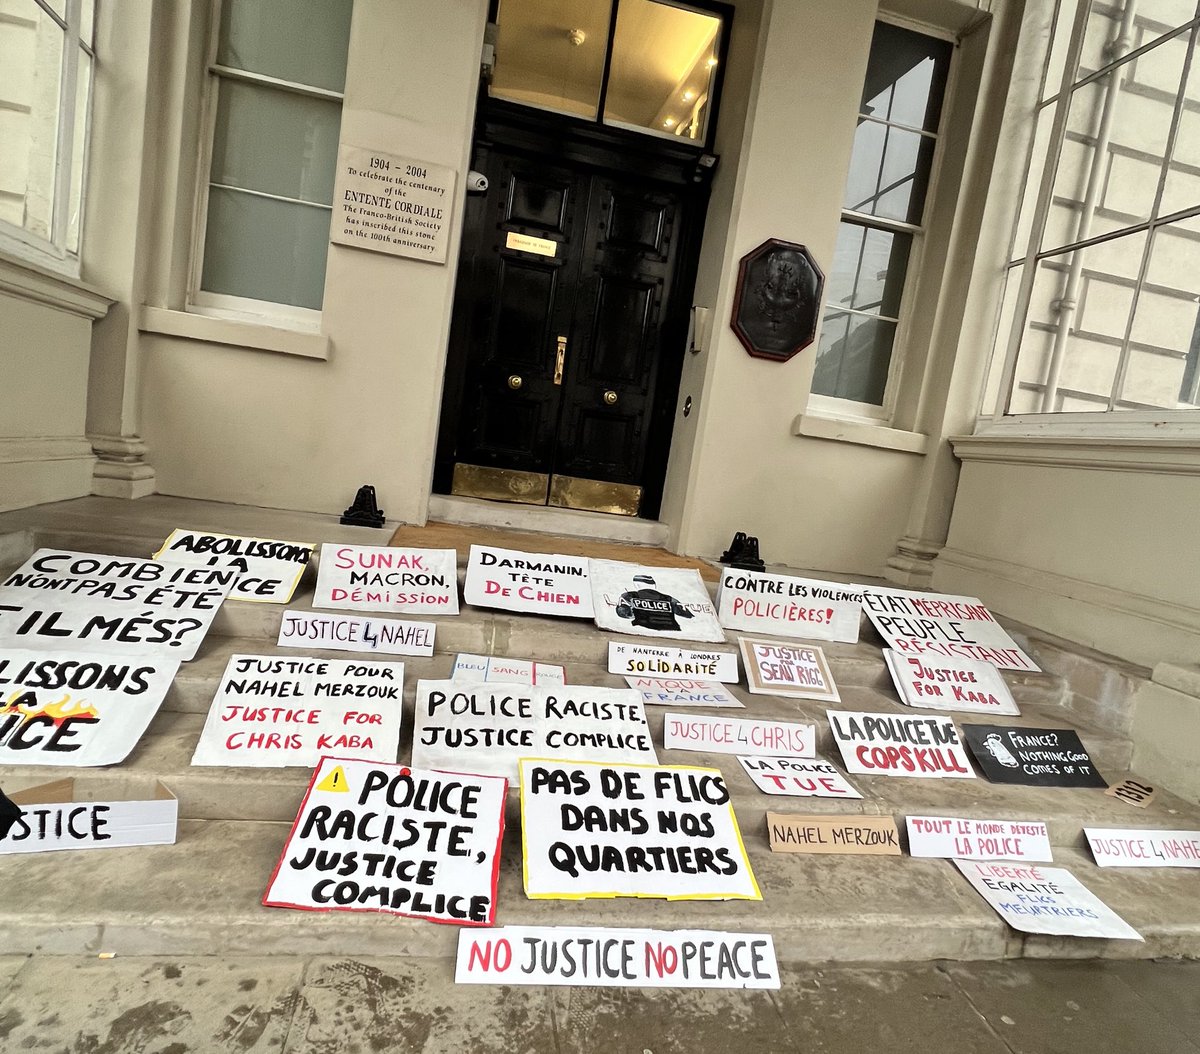 Placards outside the French embassy in London against systemic police violence and racism in France. Solidarity with the resistance in the banlieues. ✊🏾
#JusticePourNahel #JusticePourAdama 

@ukblm